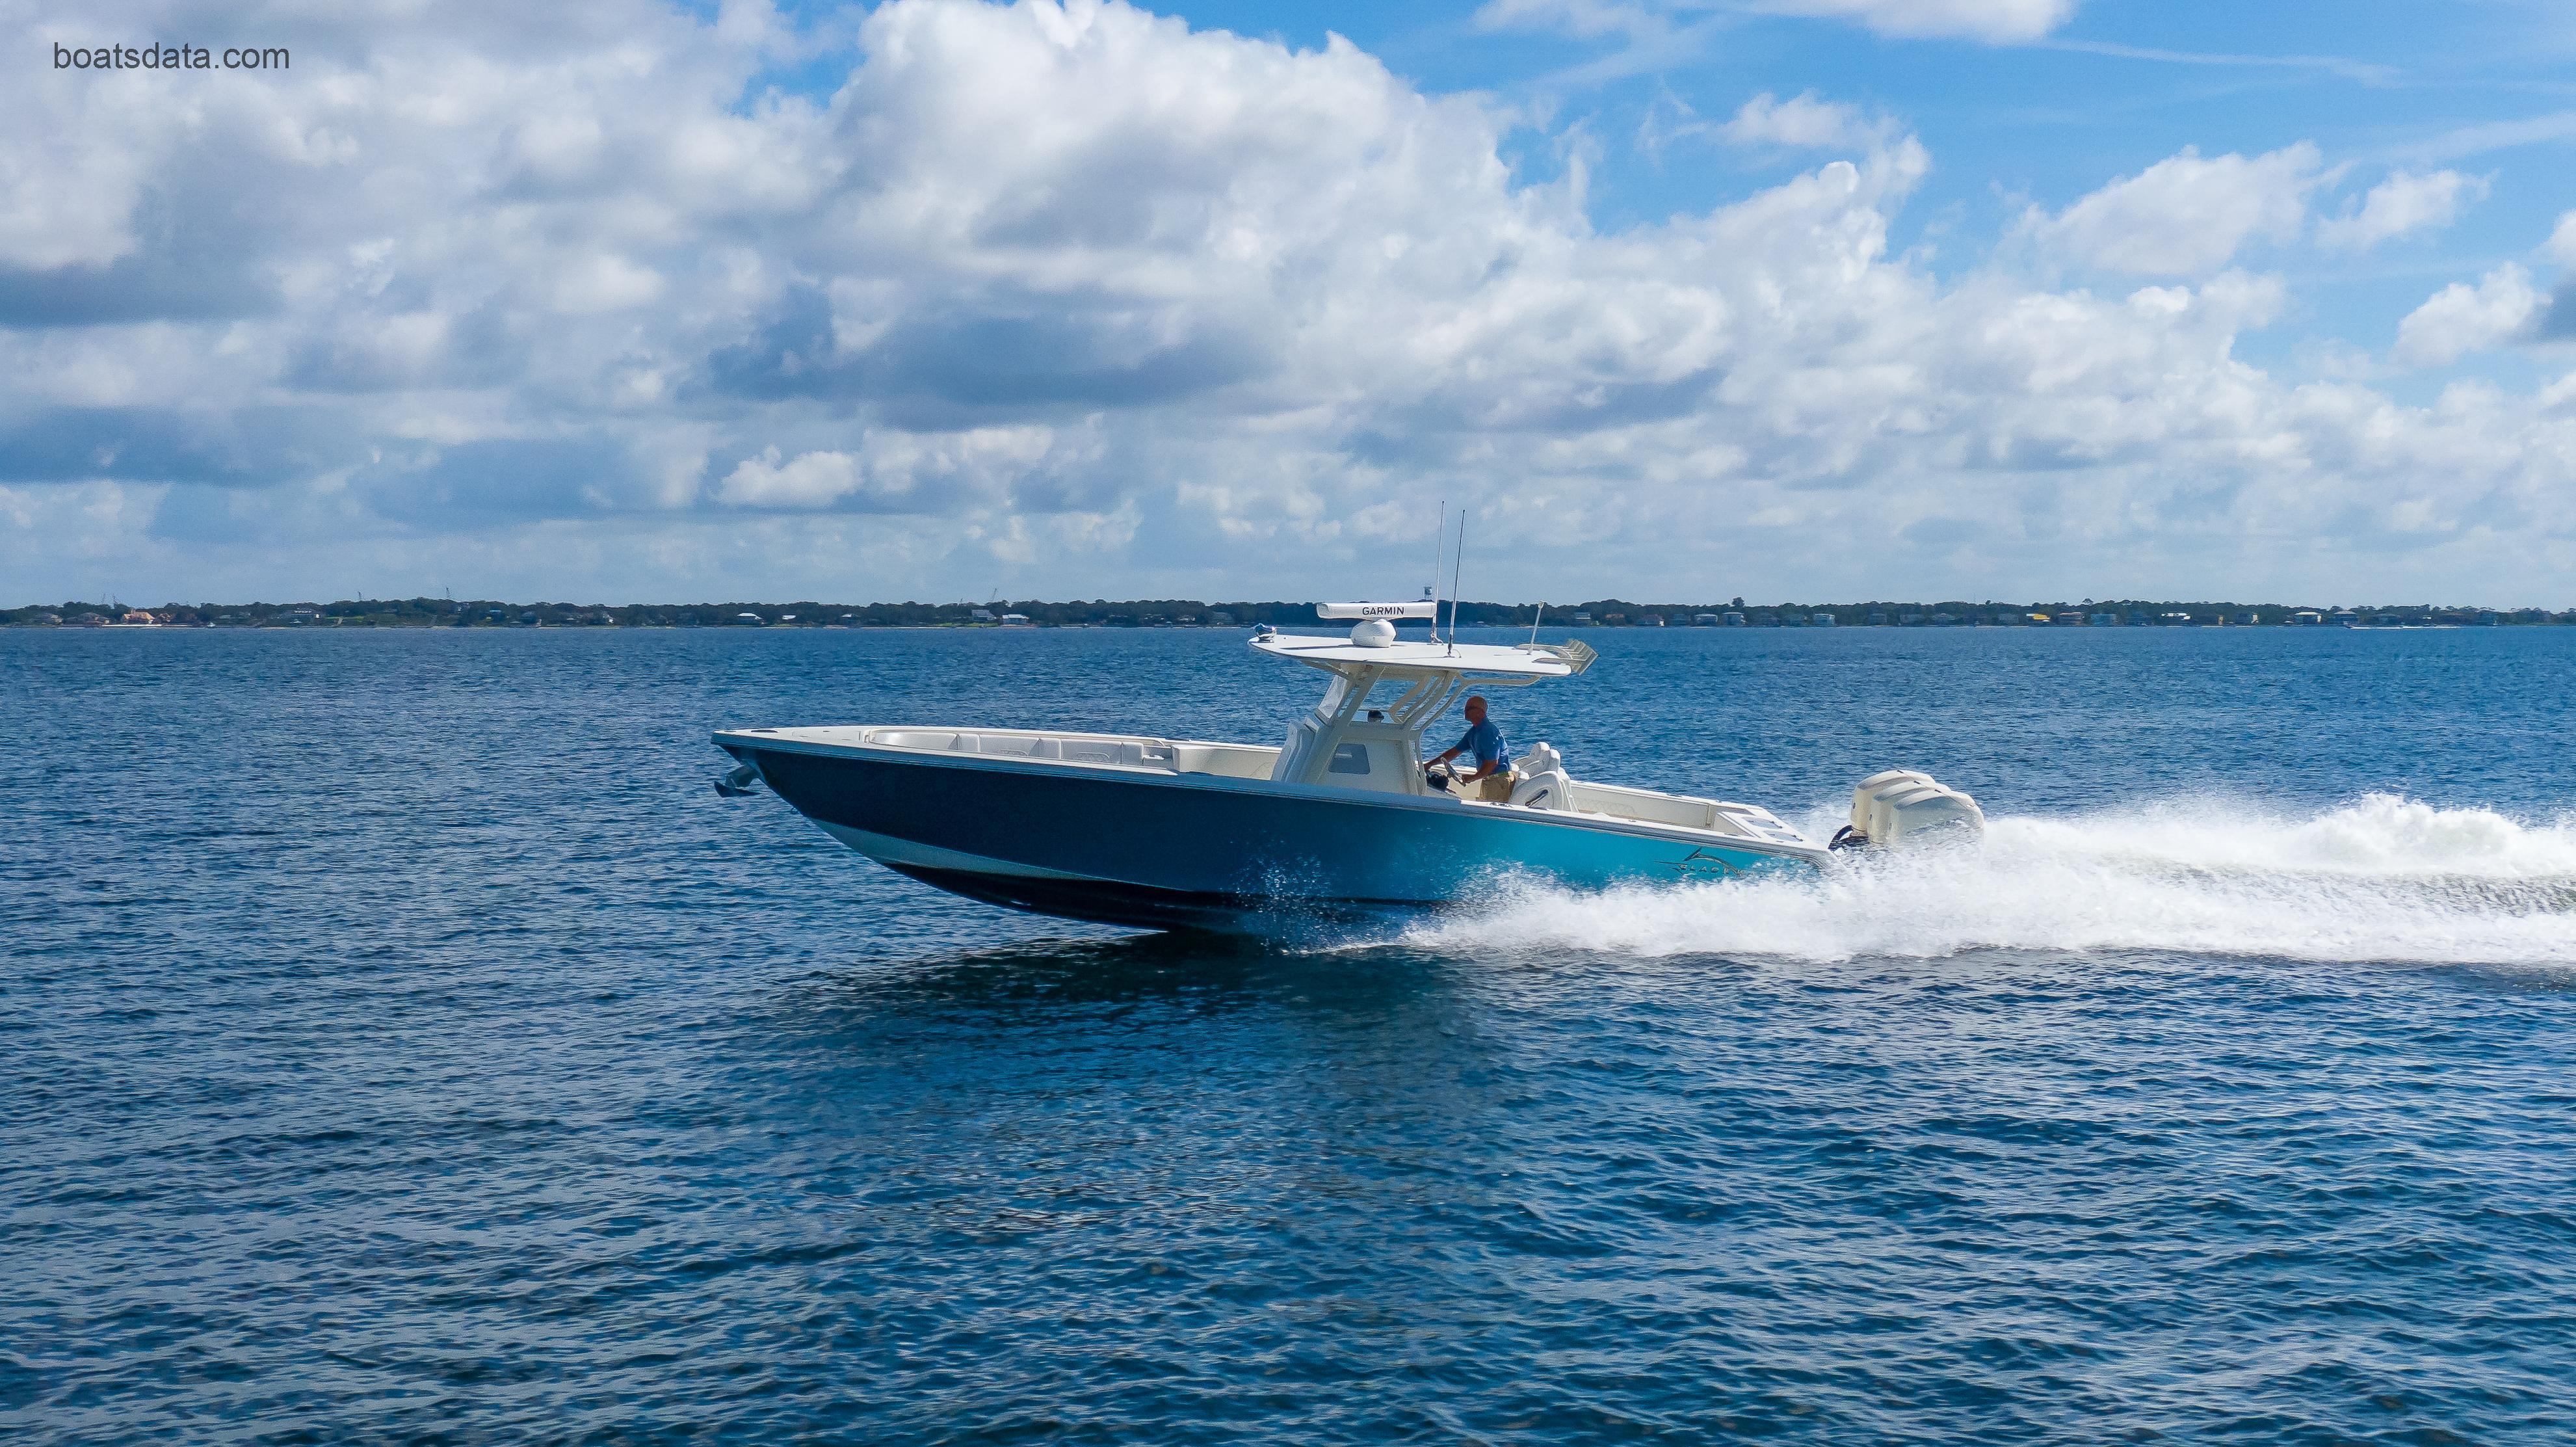 BlackWater 36 Sportfish tv detailed specifications and features